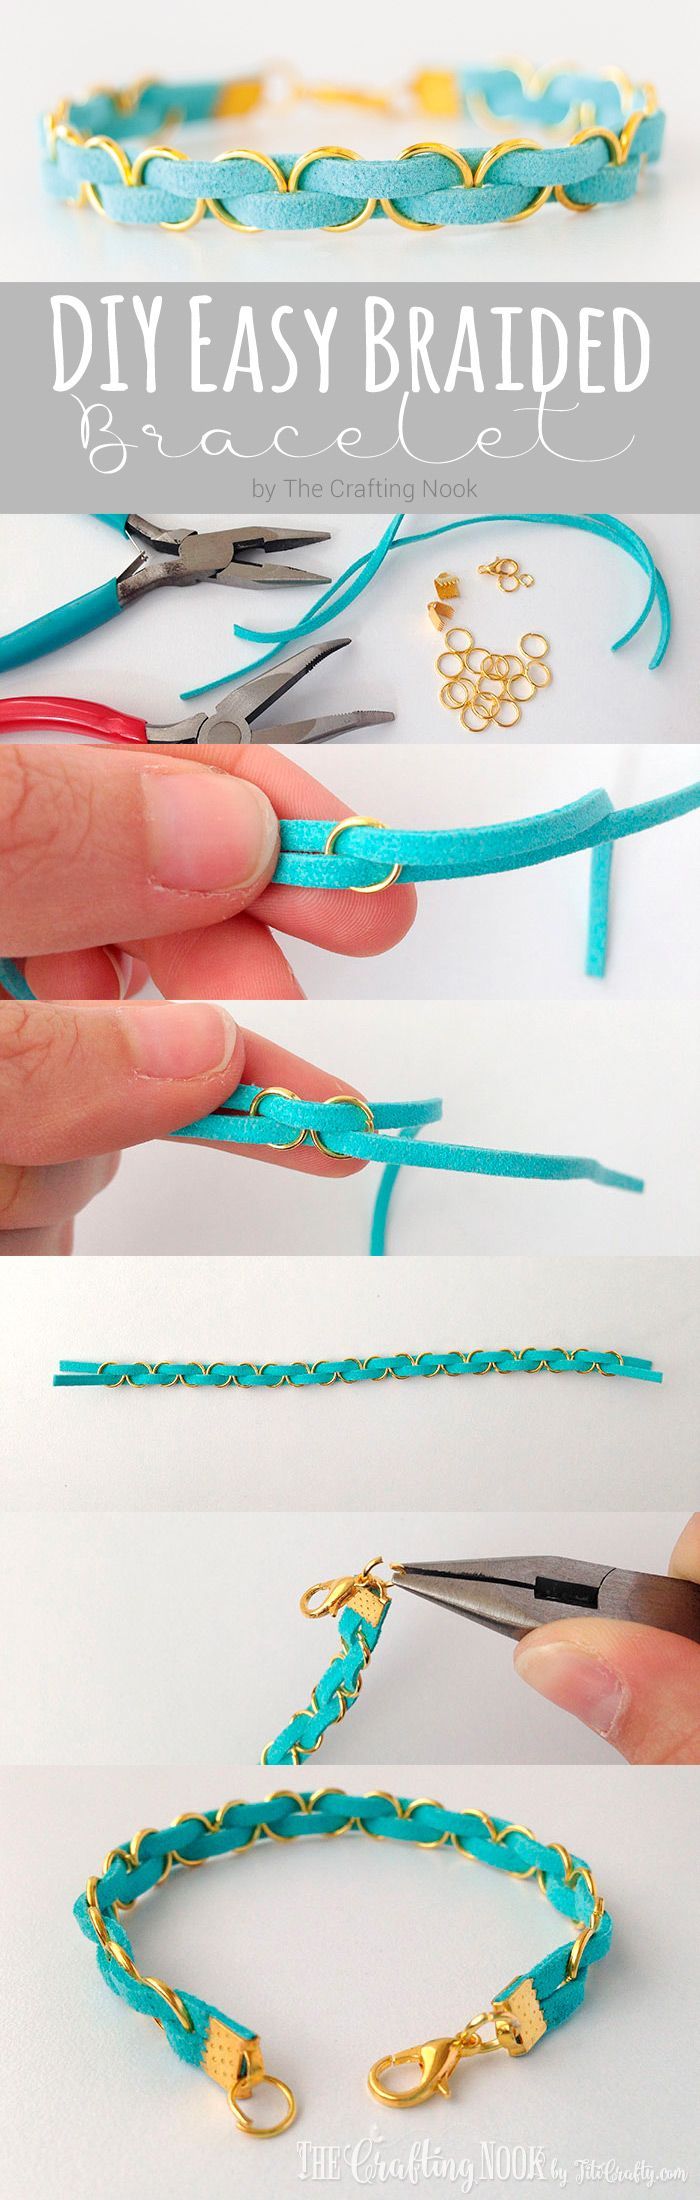 This DIY Easy Braided Bracelet is so much fun to make and the possibilities are en